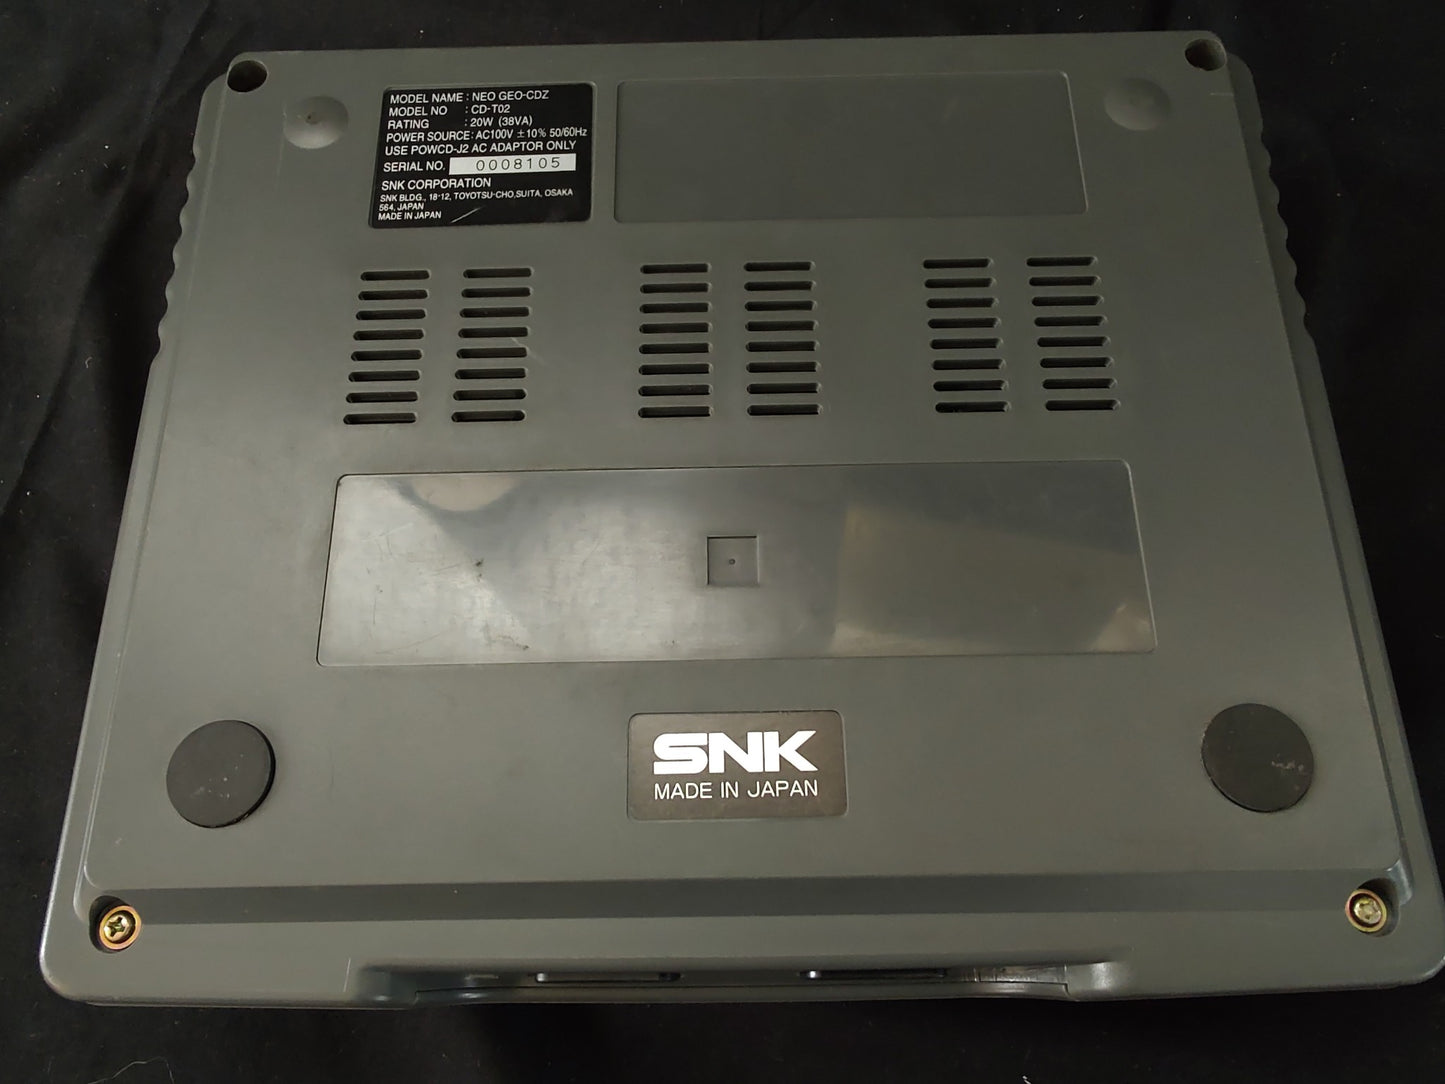 SNK NEO GEO CDZ NGCD Console System,w/Controller,AC Adapter,AV Cable,Game-f1014-